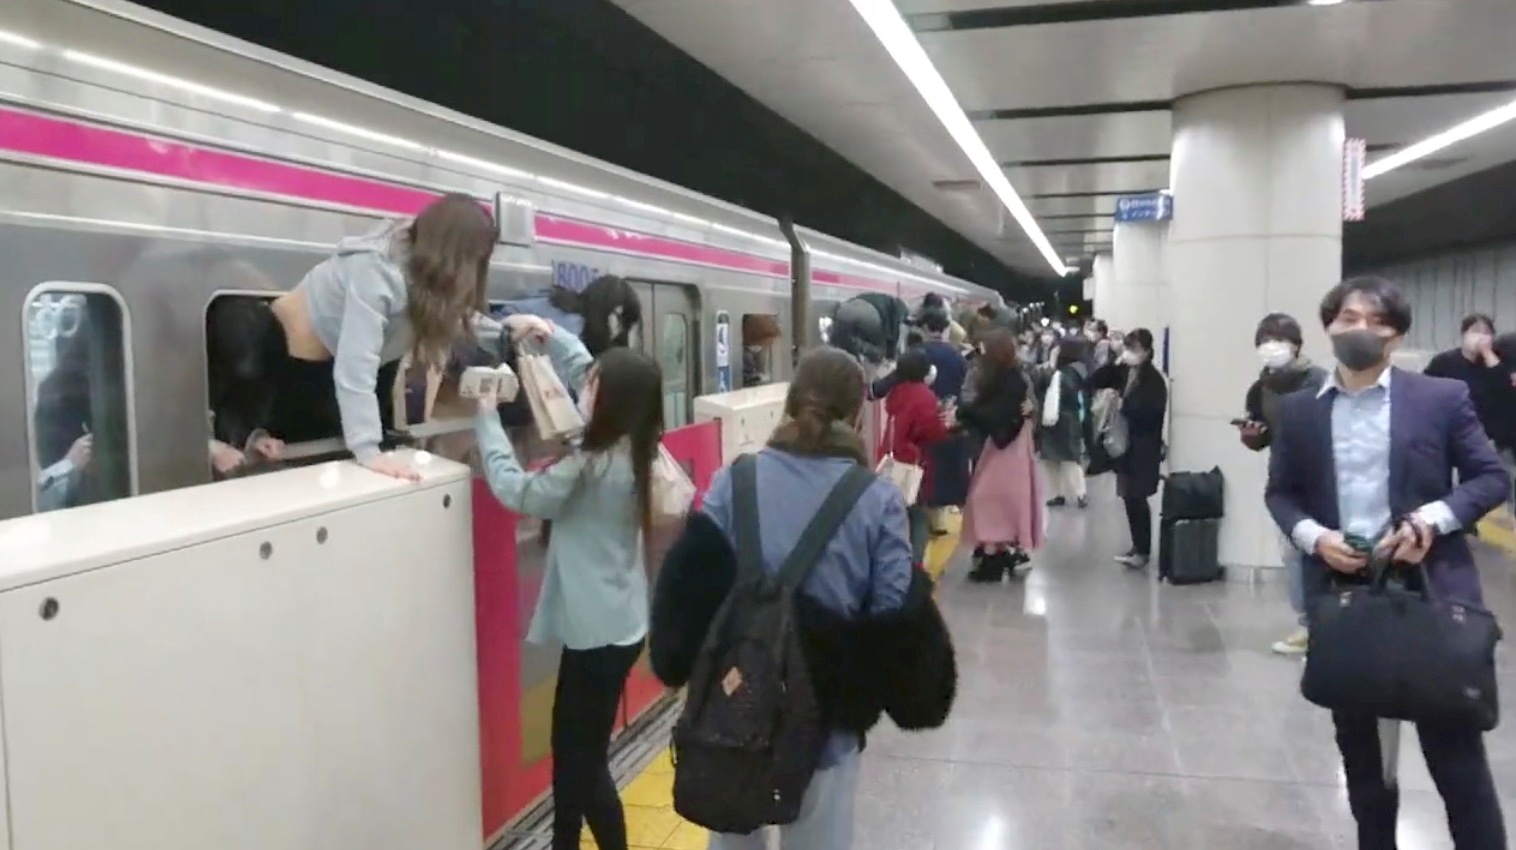 People escape through windows of a Tokyo train line following a knife, arson and acid attack, in Tokyo, Japan October 31, 2021 in this still image obtained from a social media video. TWITTER / @SIZ33/via REUTERS 